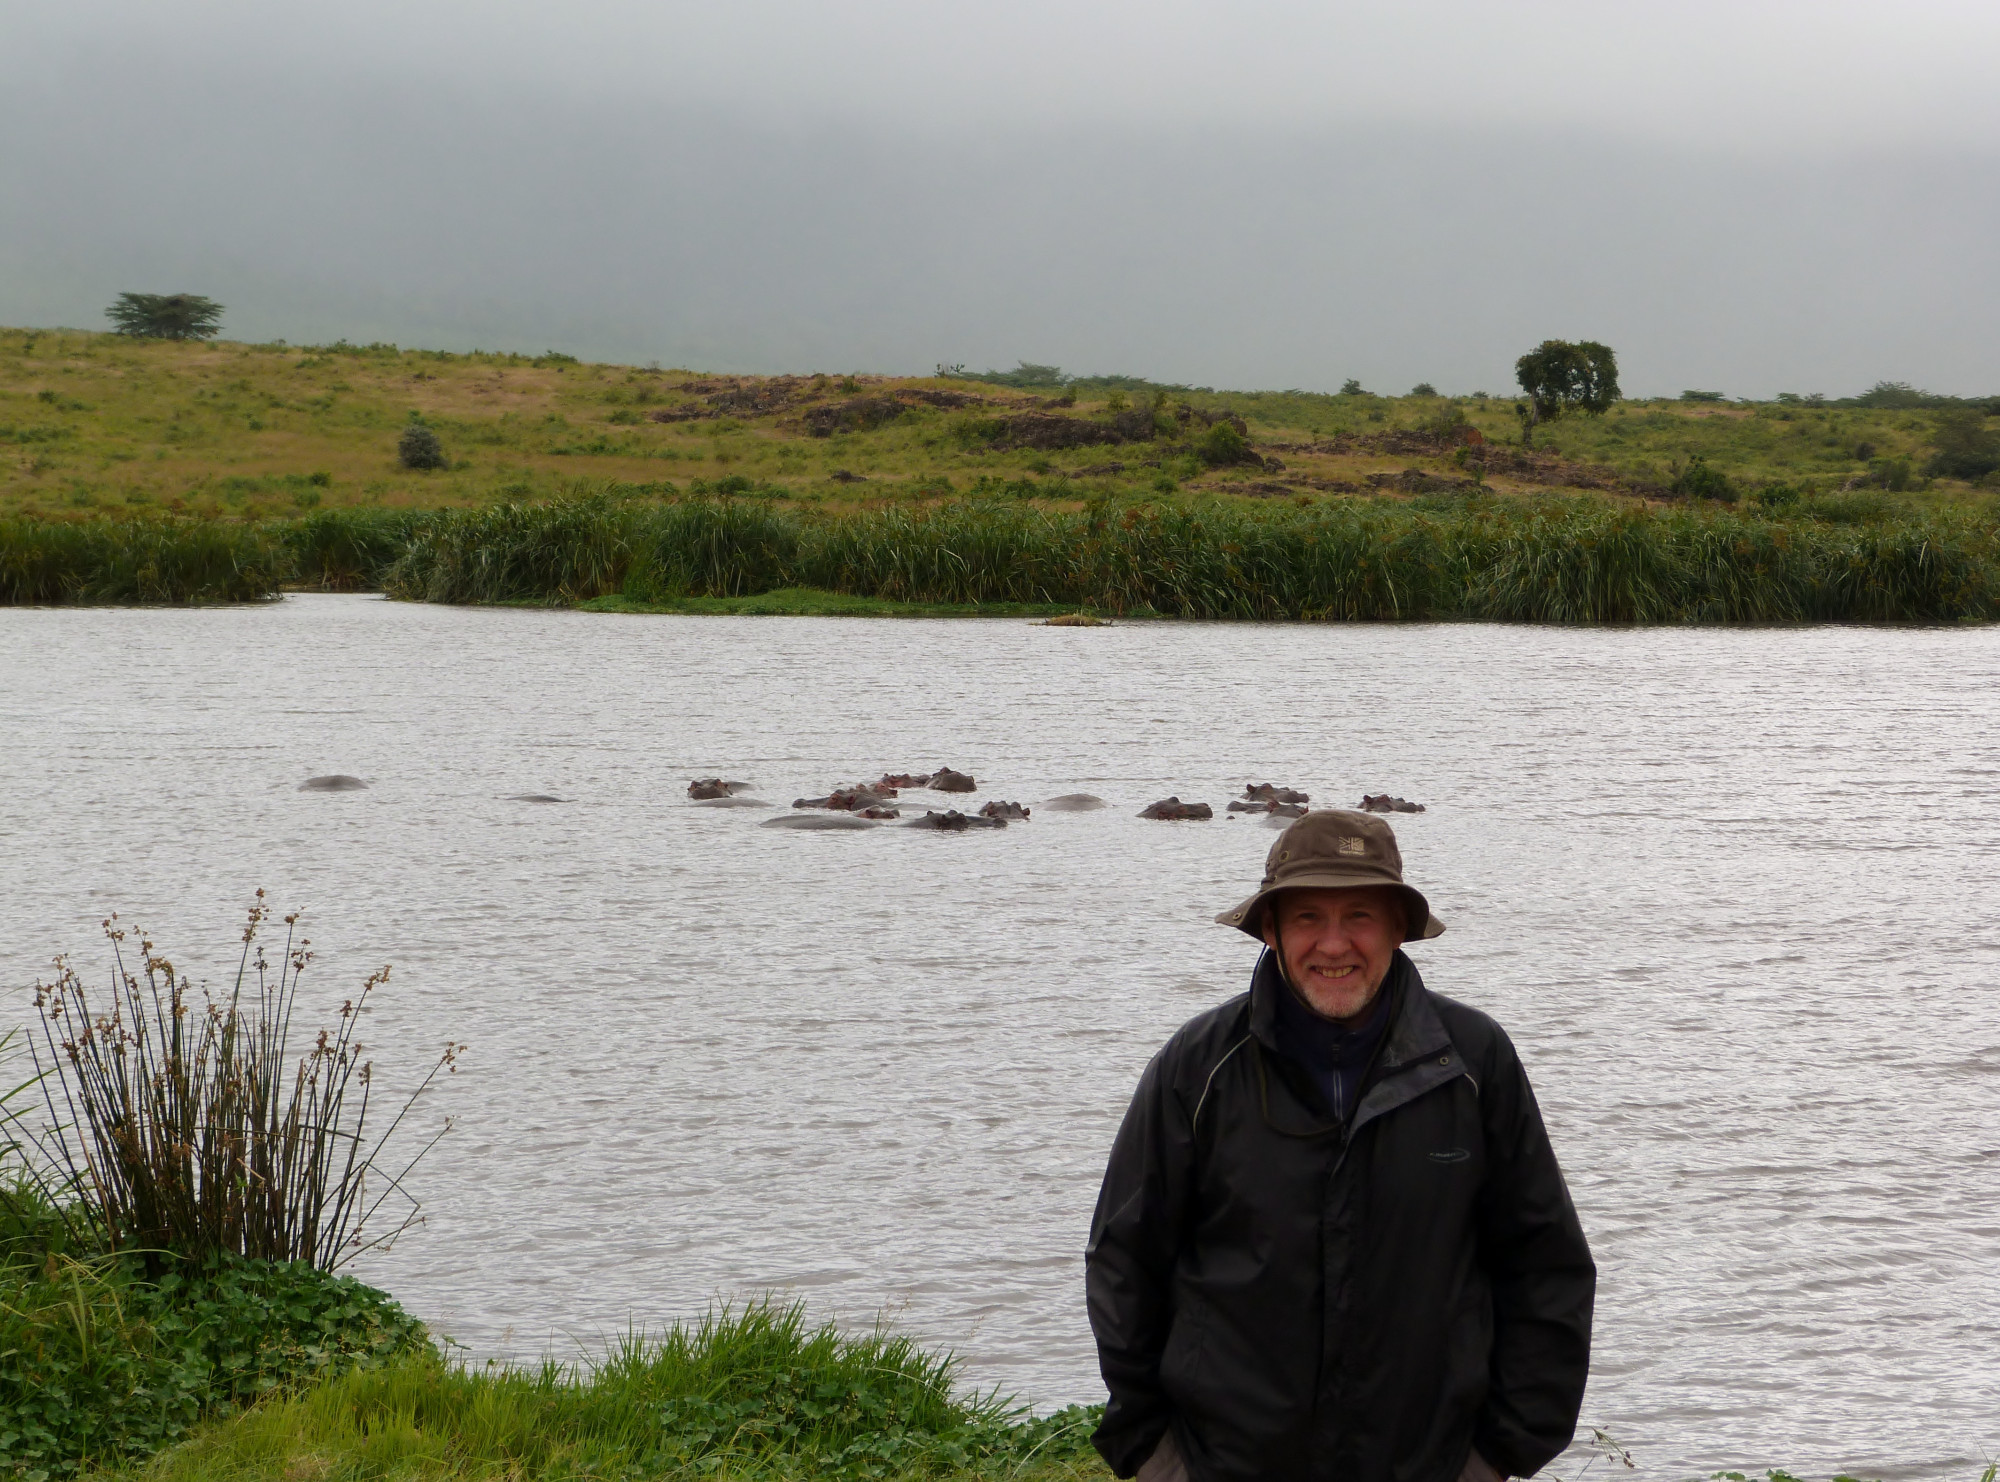 Just me and a few Hippos